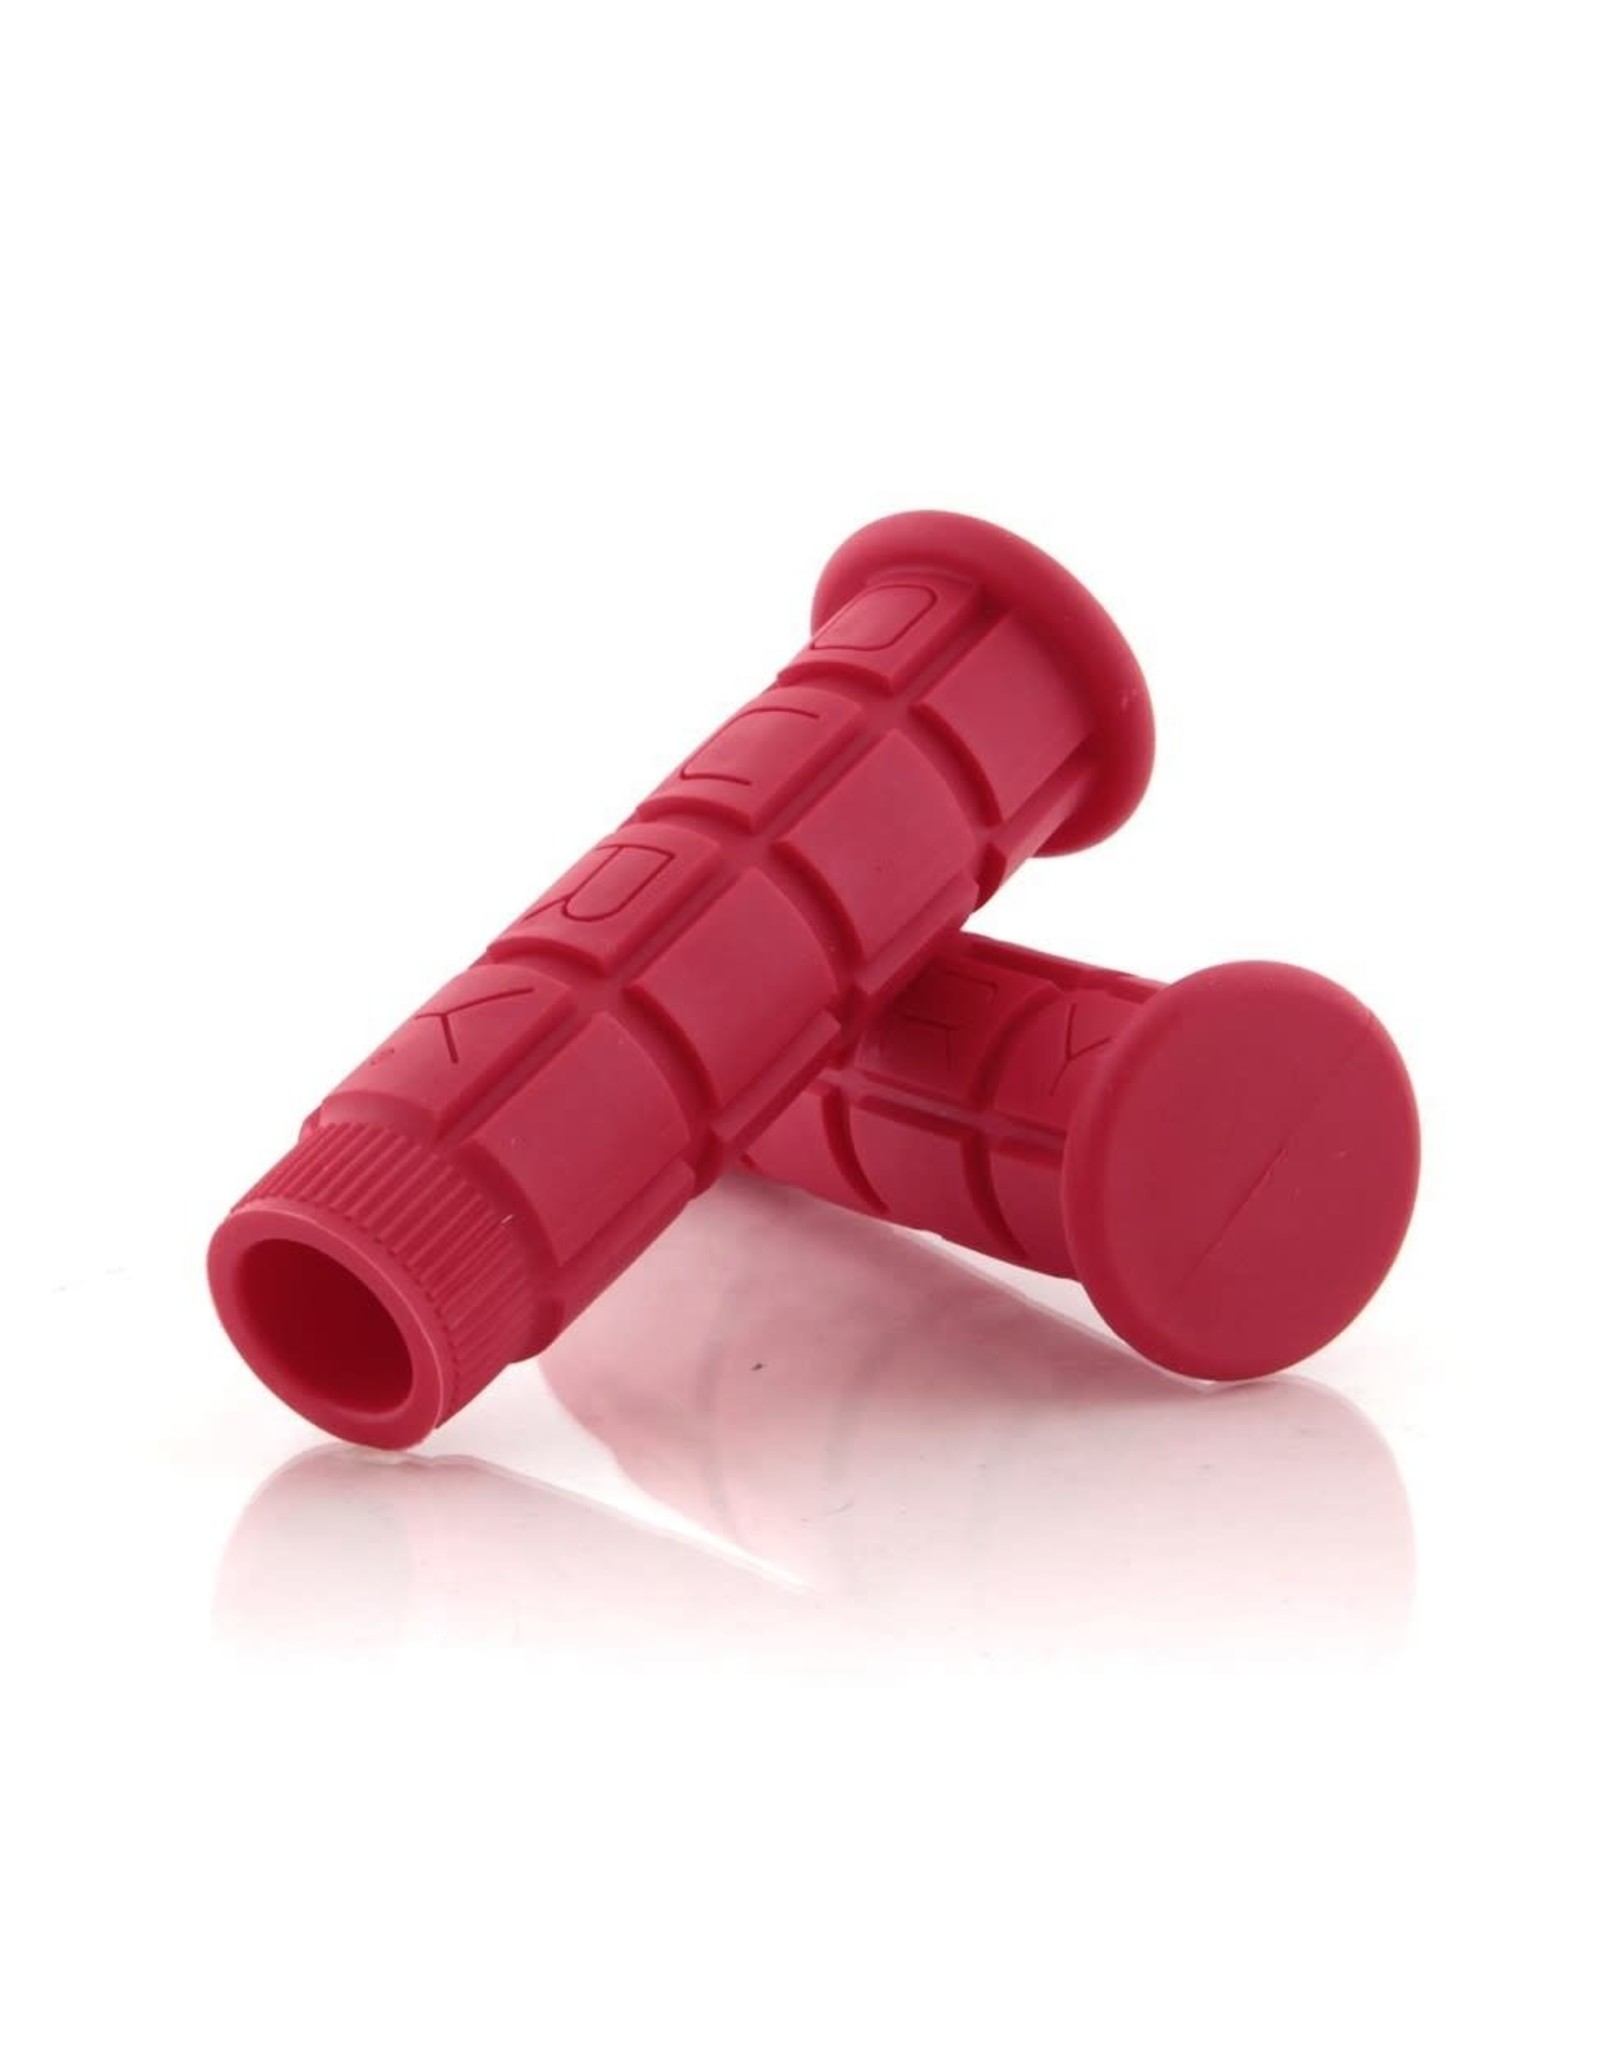 OURY OURY - MOUNTAIN GRIPS - RED